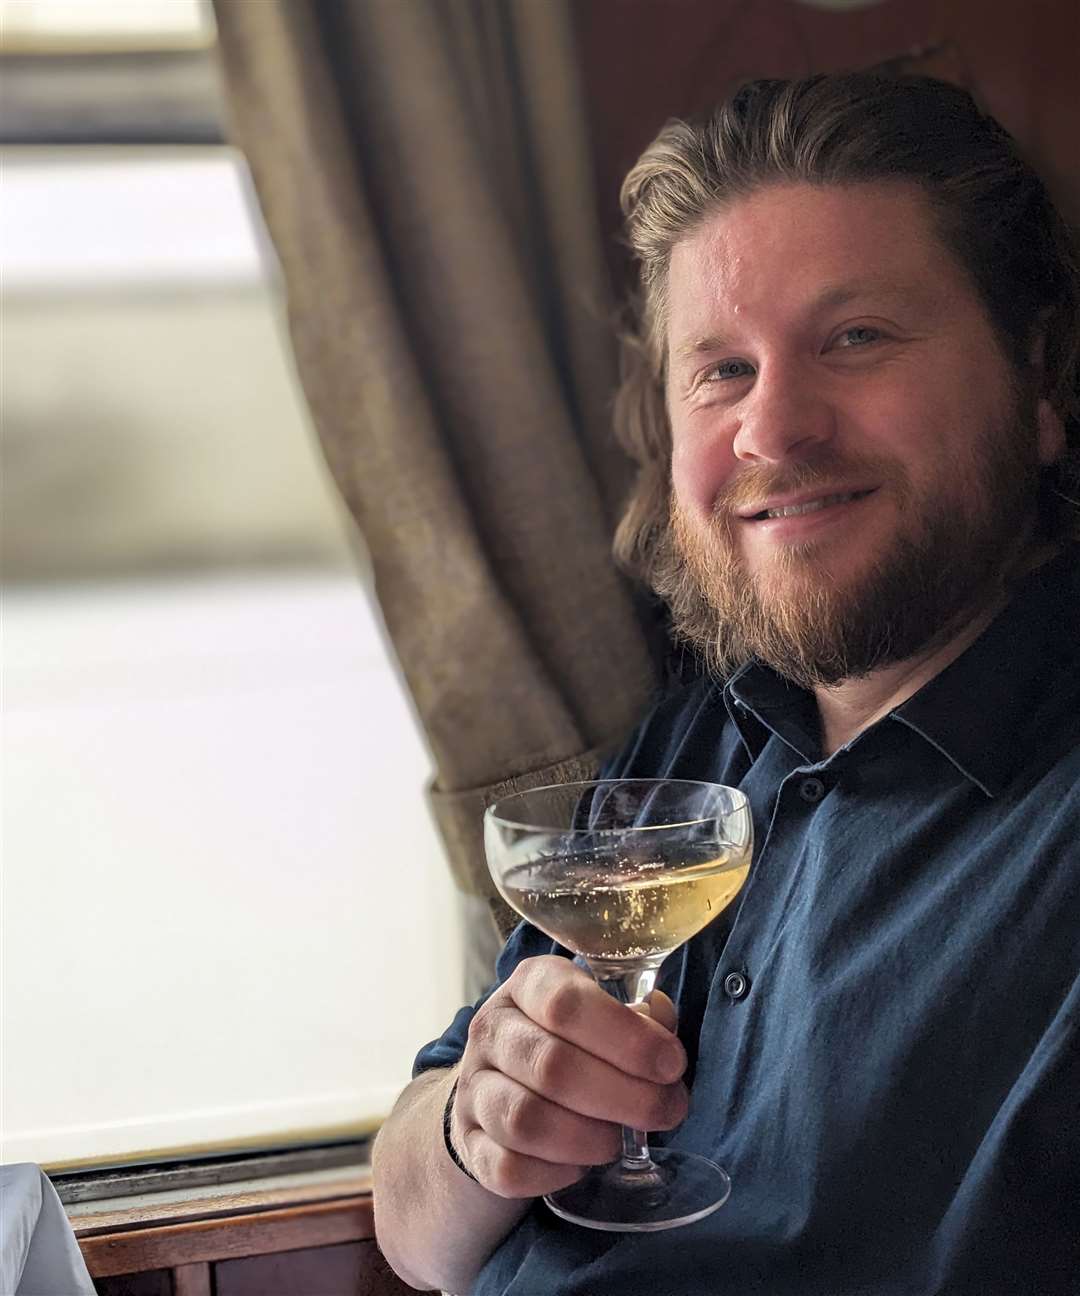 Our man settles in with a glass of bubbly